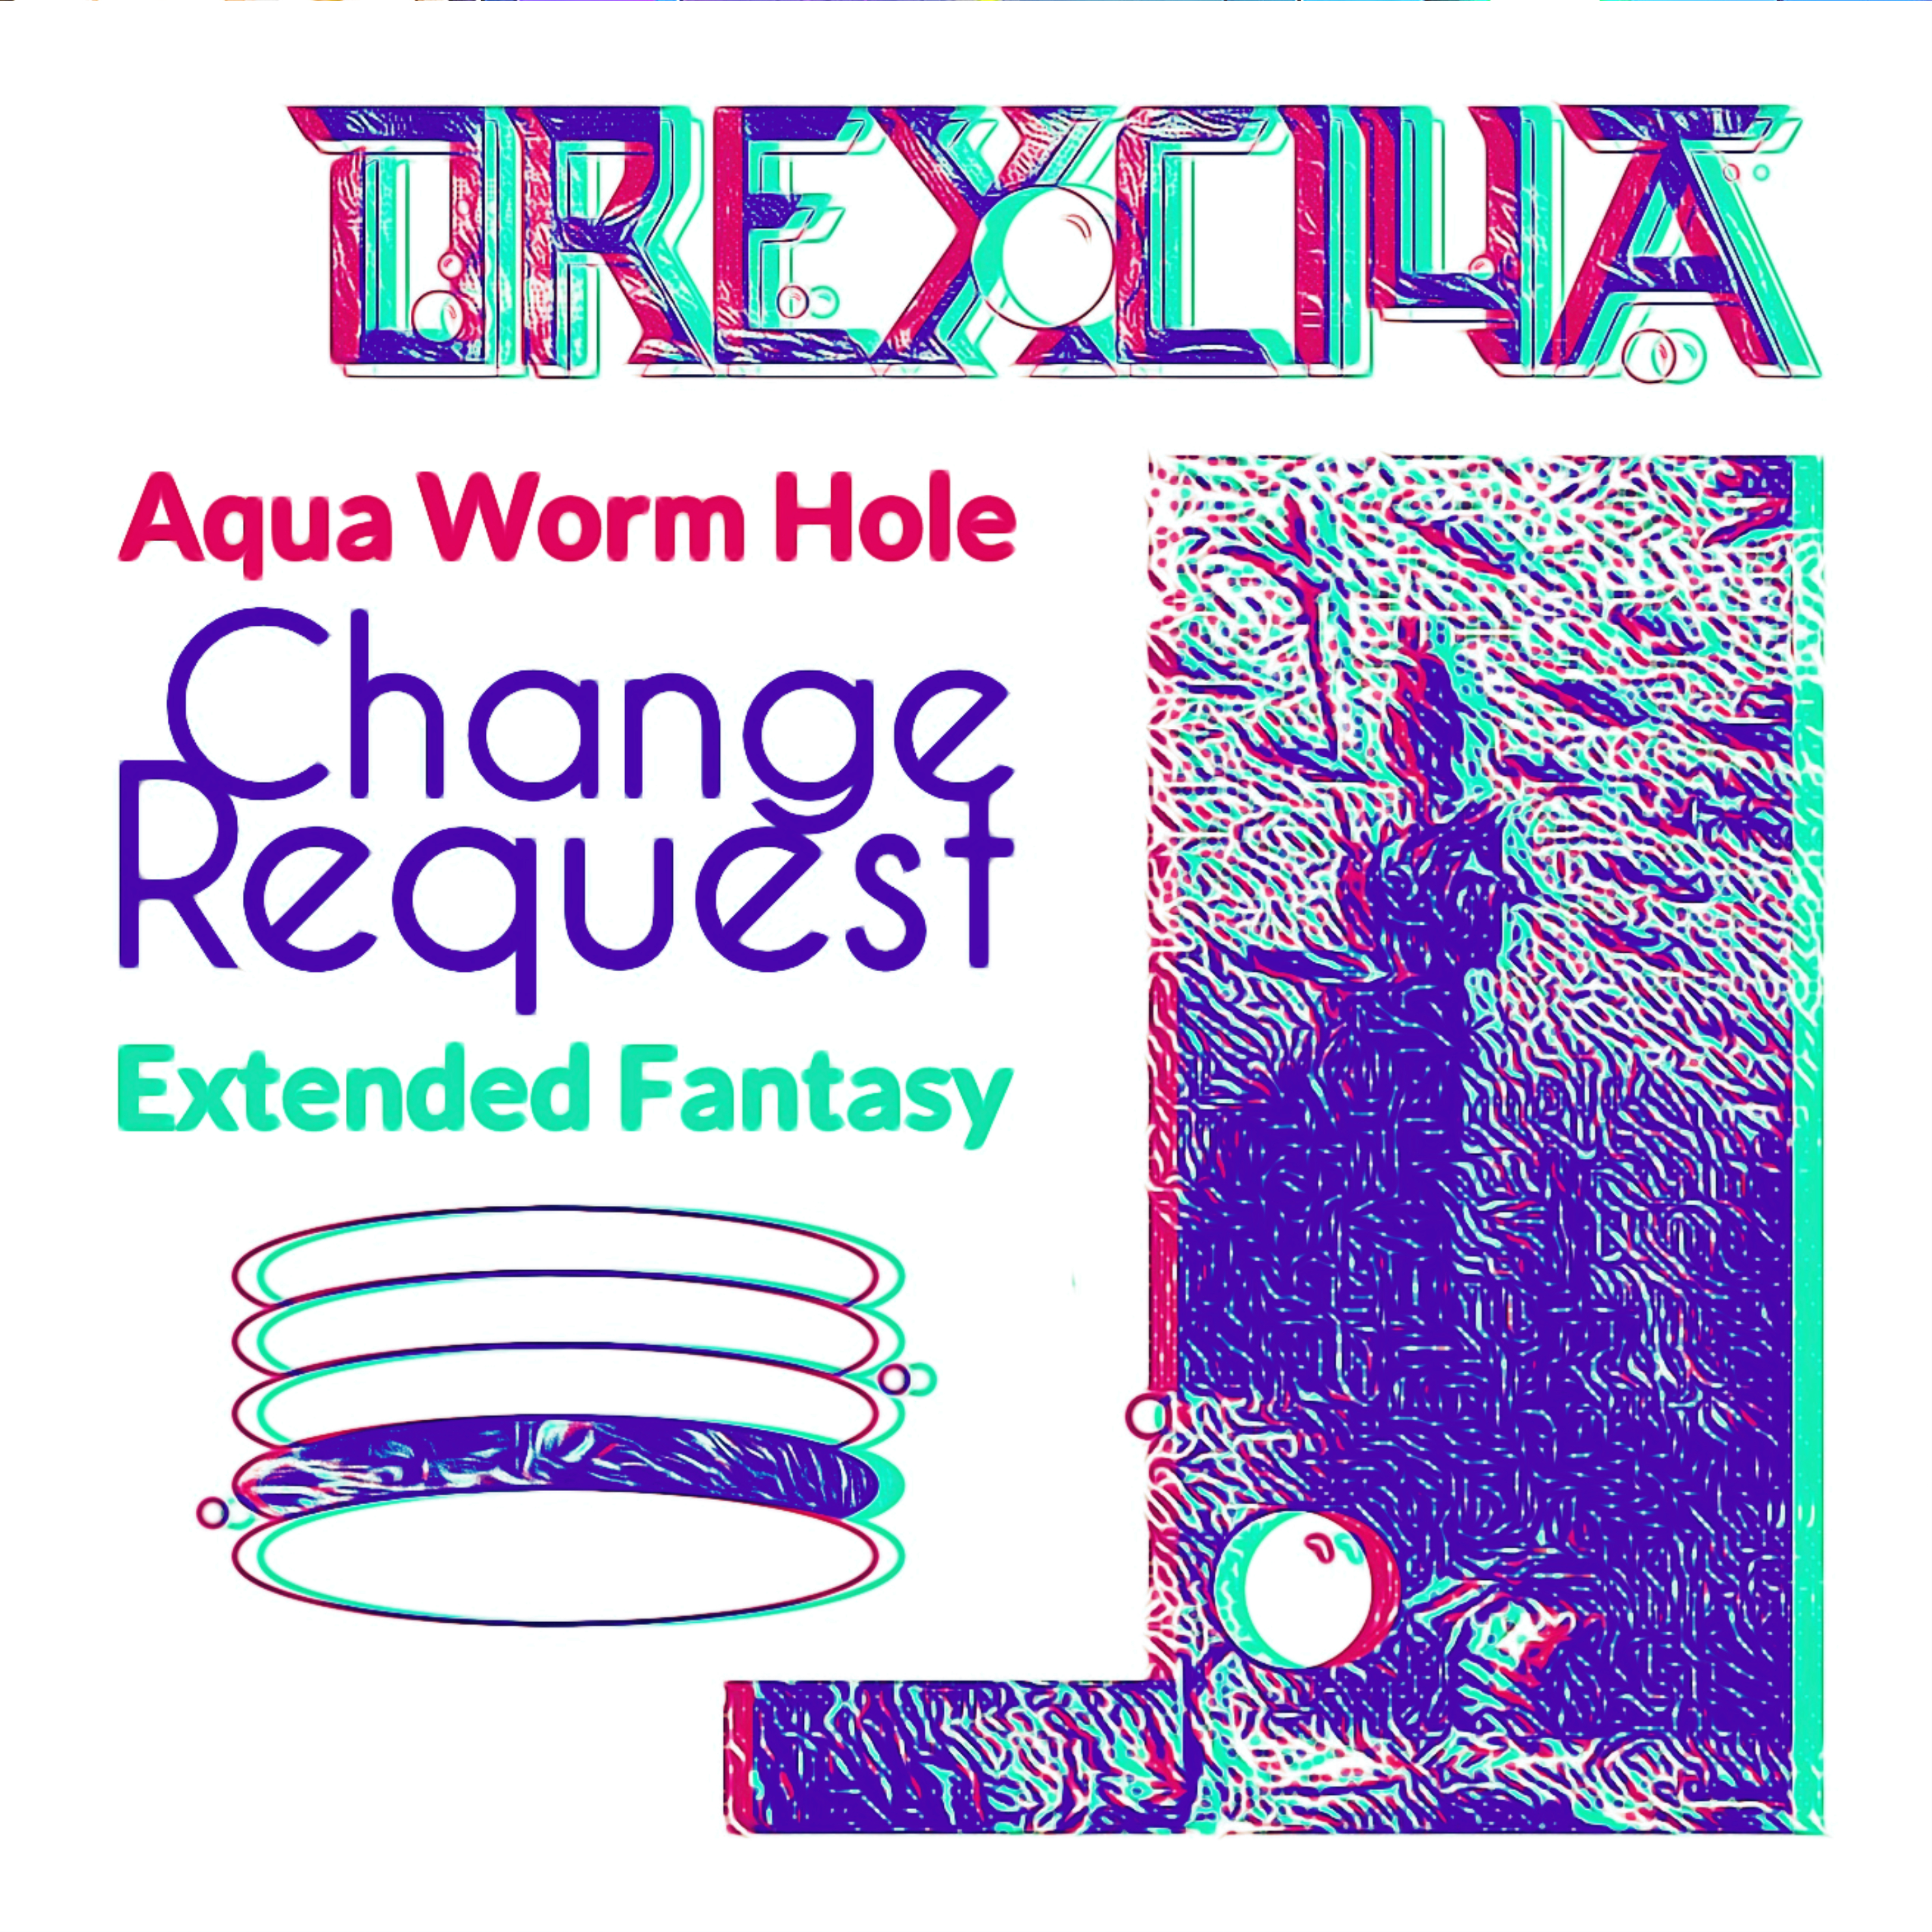 Aqua Worm Hole (Change Request Extended Fantasy)